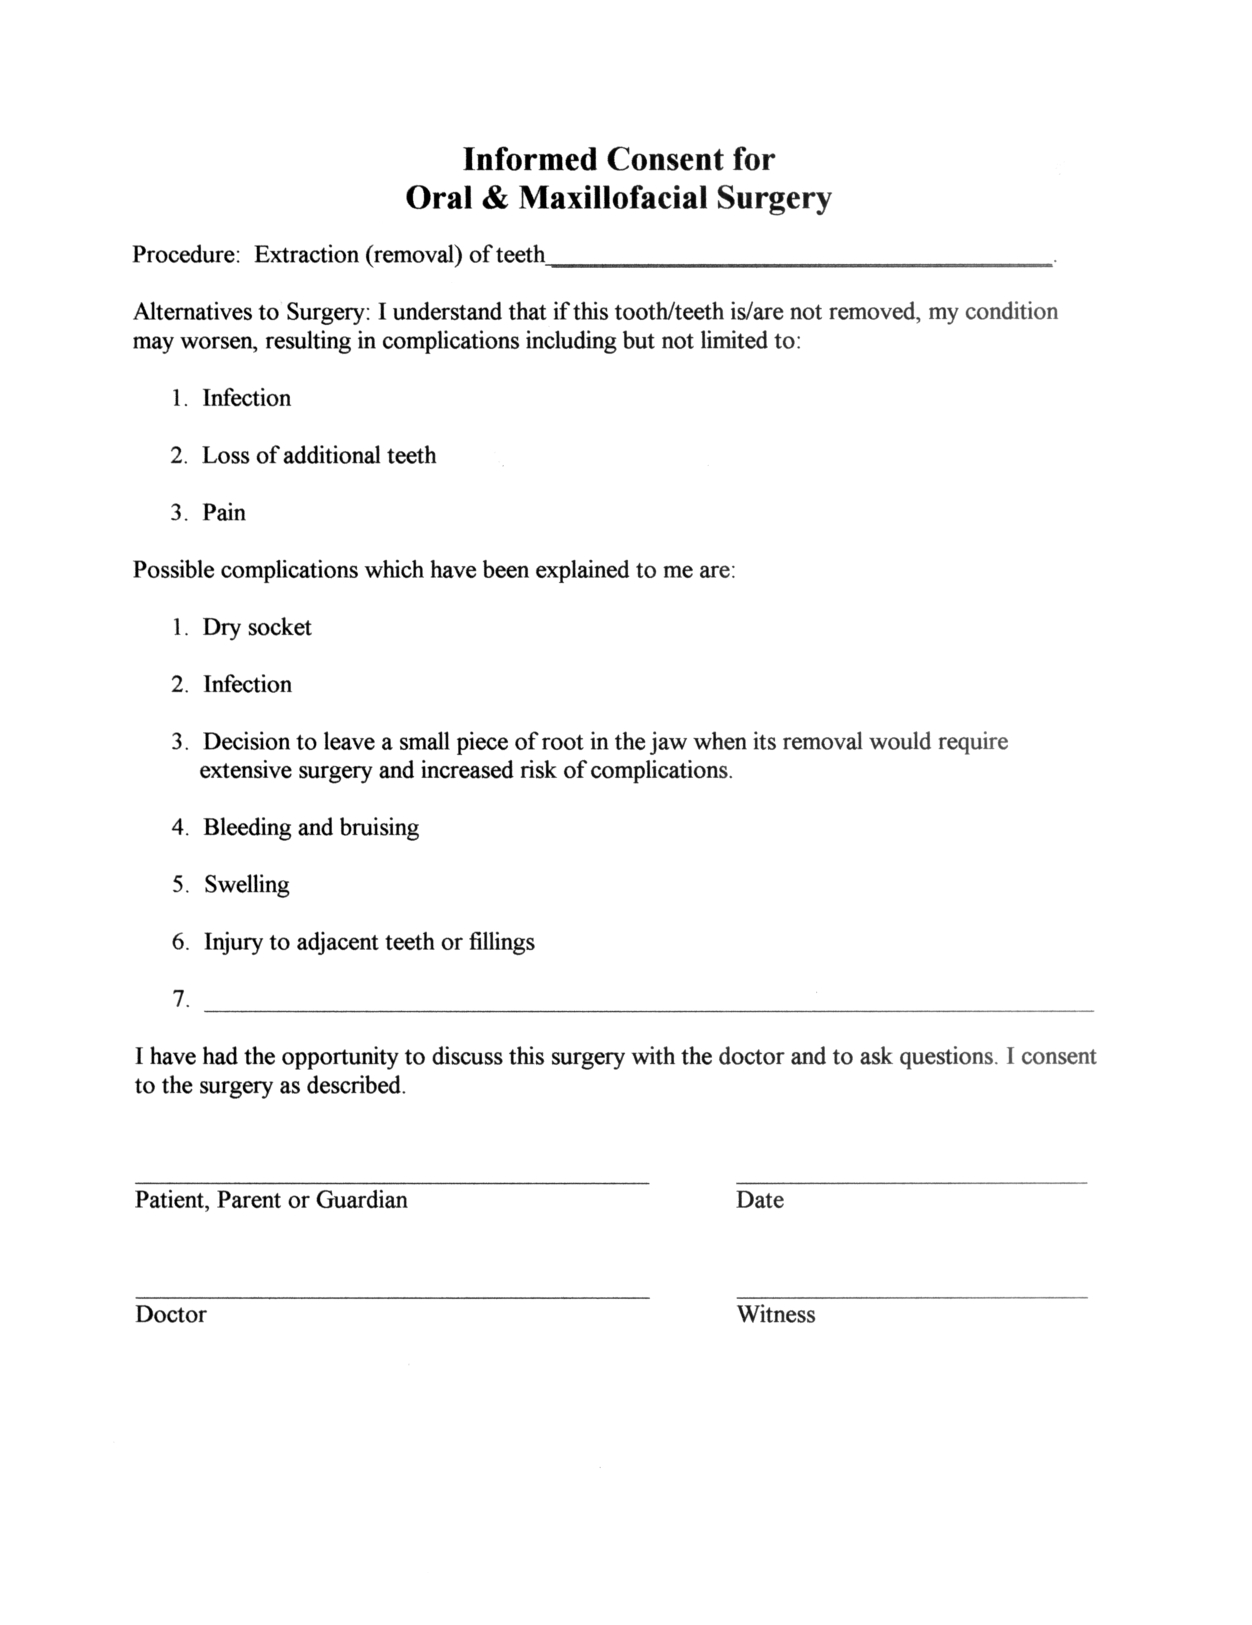 Medical Release Letter Template - Minor Surgery Consent form Template Consent form